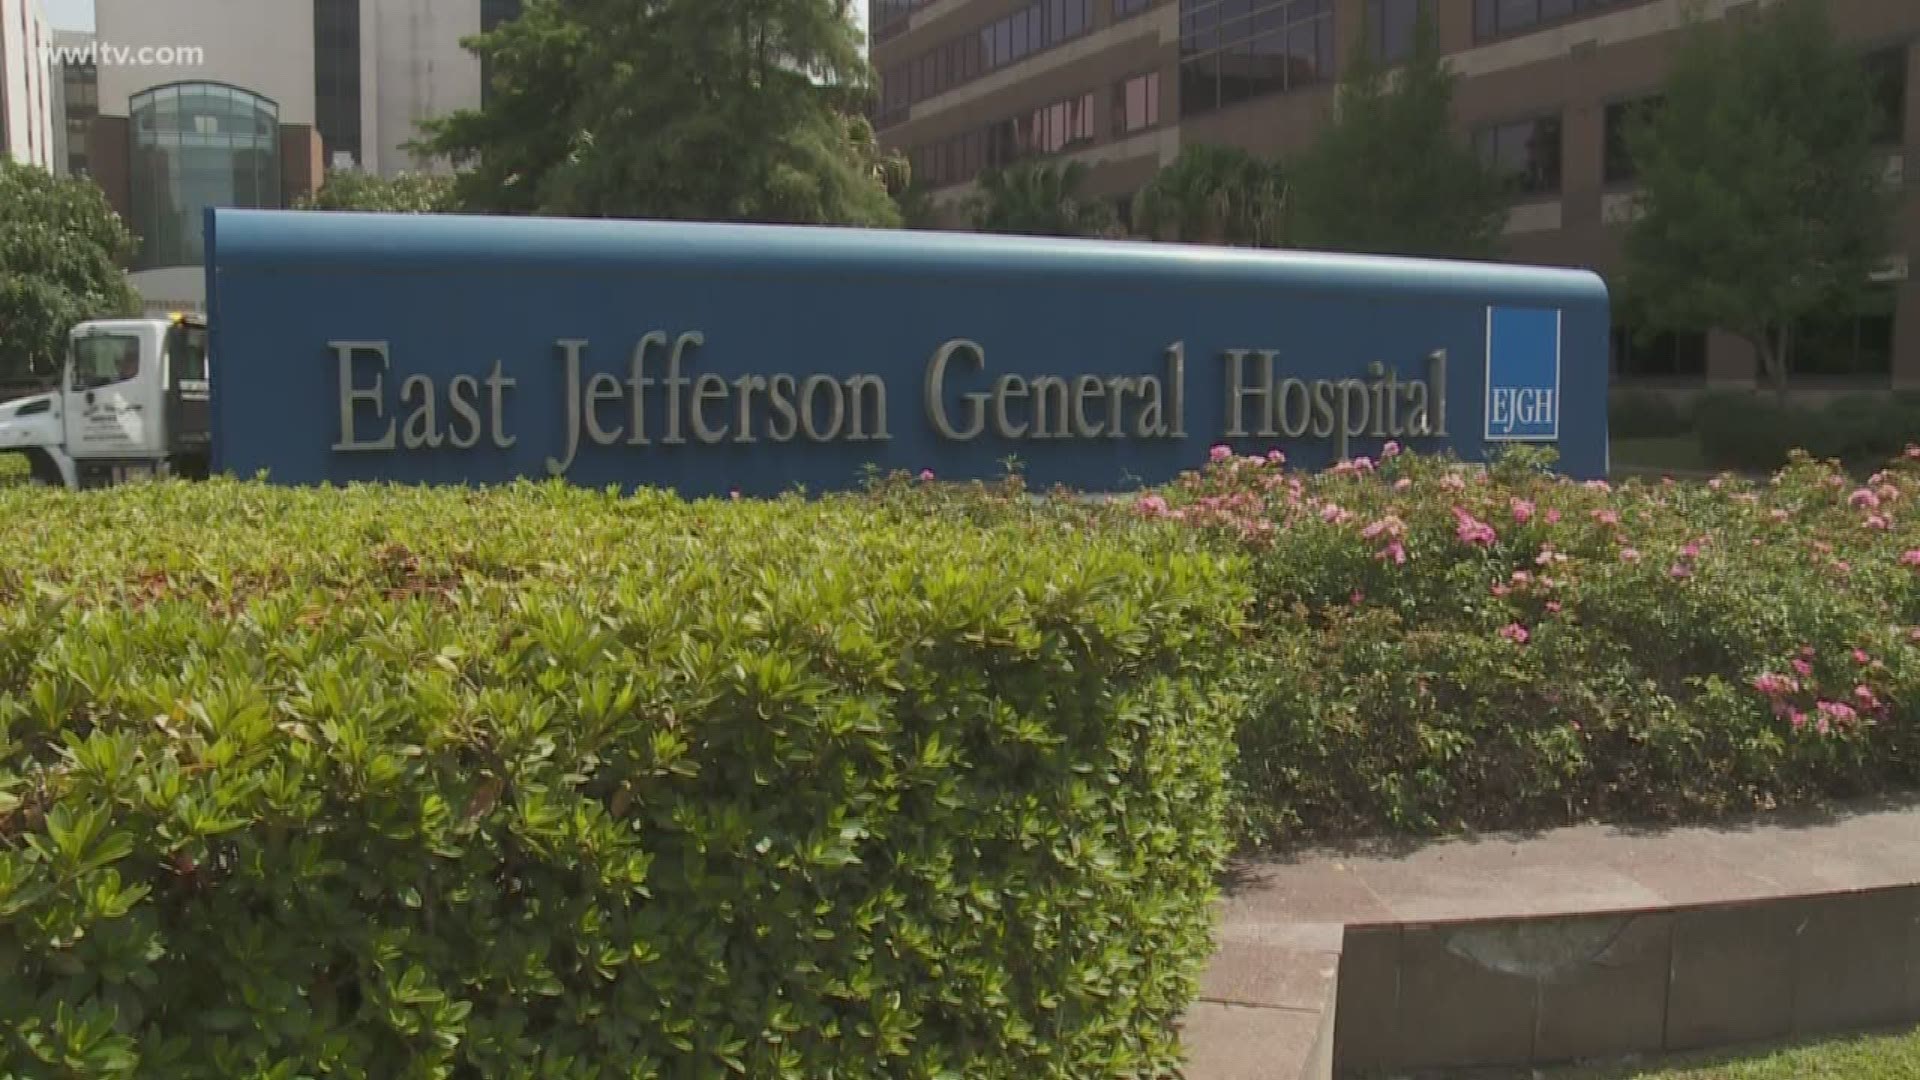 Meg Farris talks about what's at stake for patients and others after the latest deal to have someone manage East Jefferson hospital fell through.